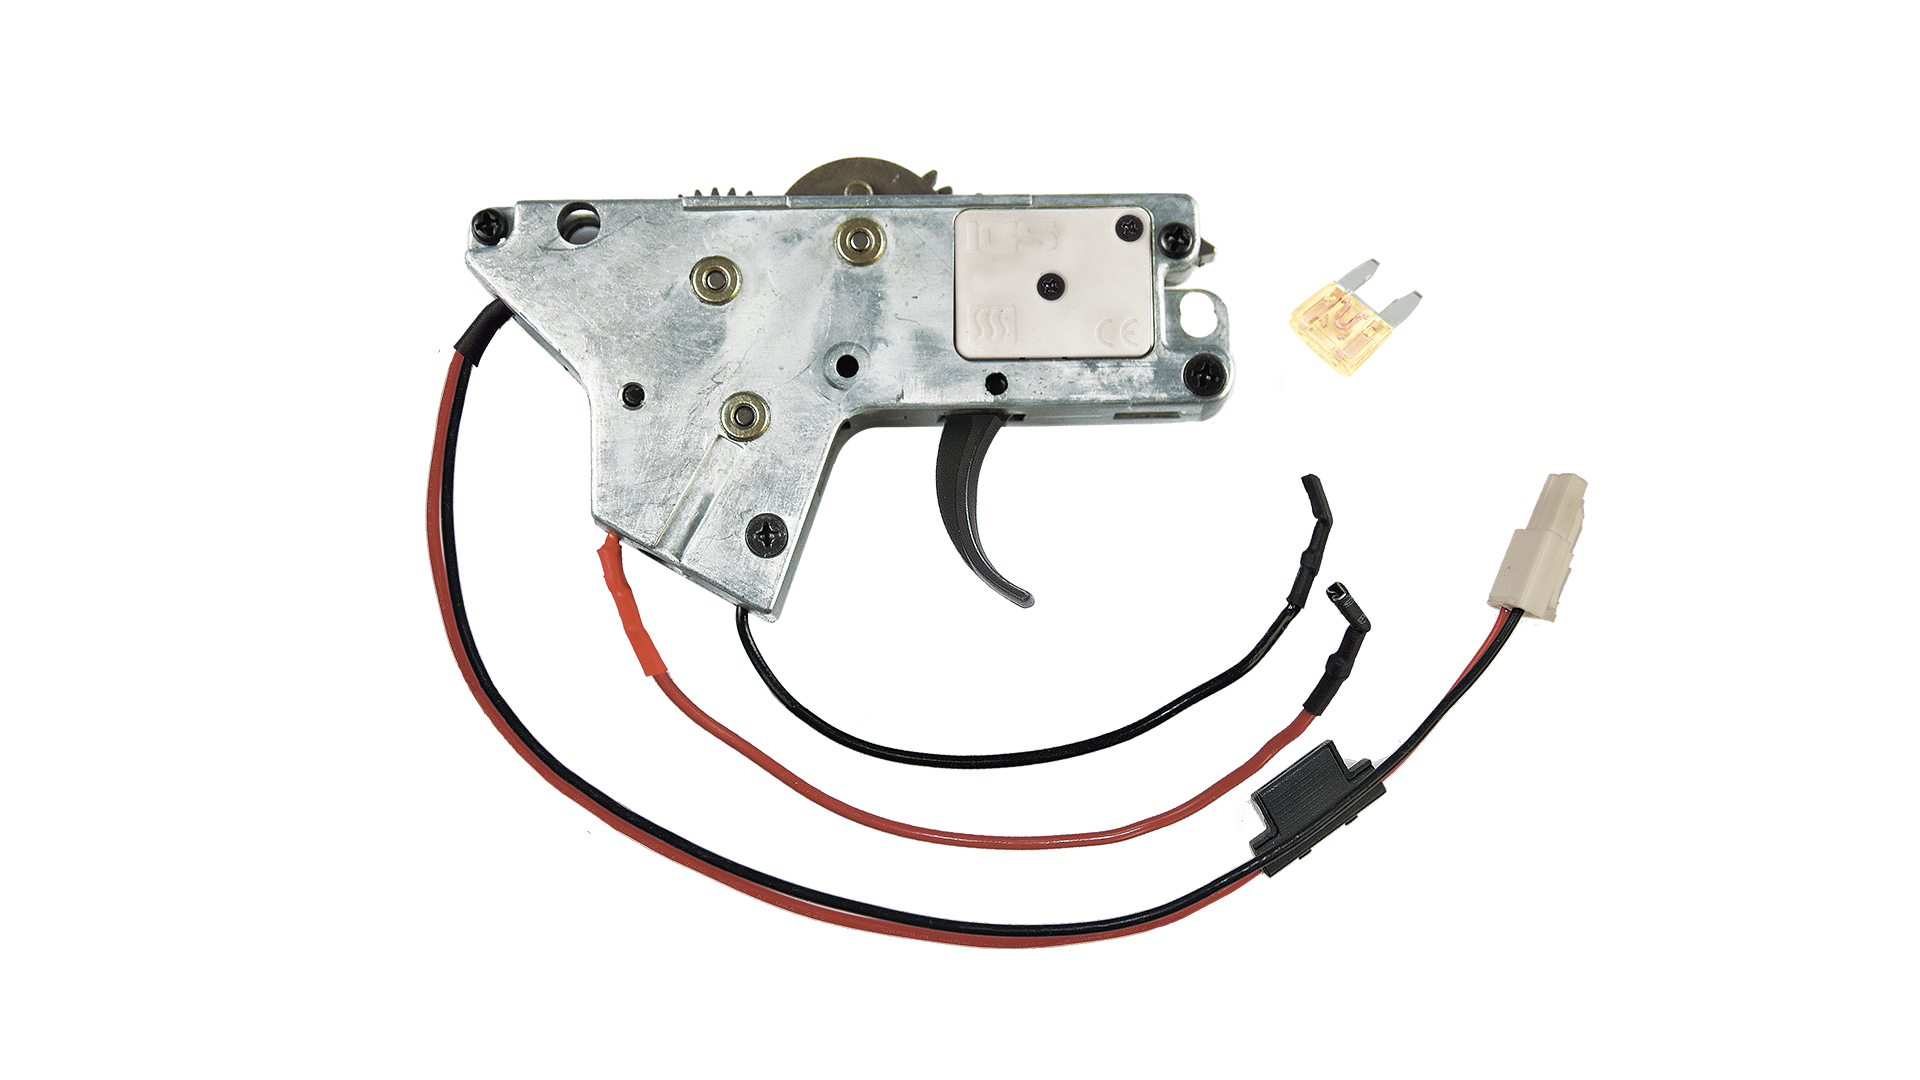 【Discontinued】【MA-486】EBB SSS II E-Trigger Lower Gearbox (8 mm Bushing Box, rear wired, Low FPS)